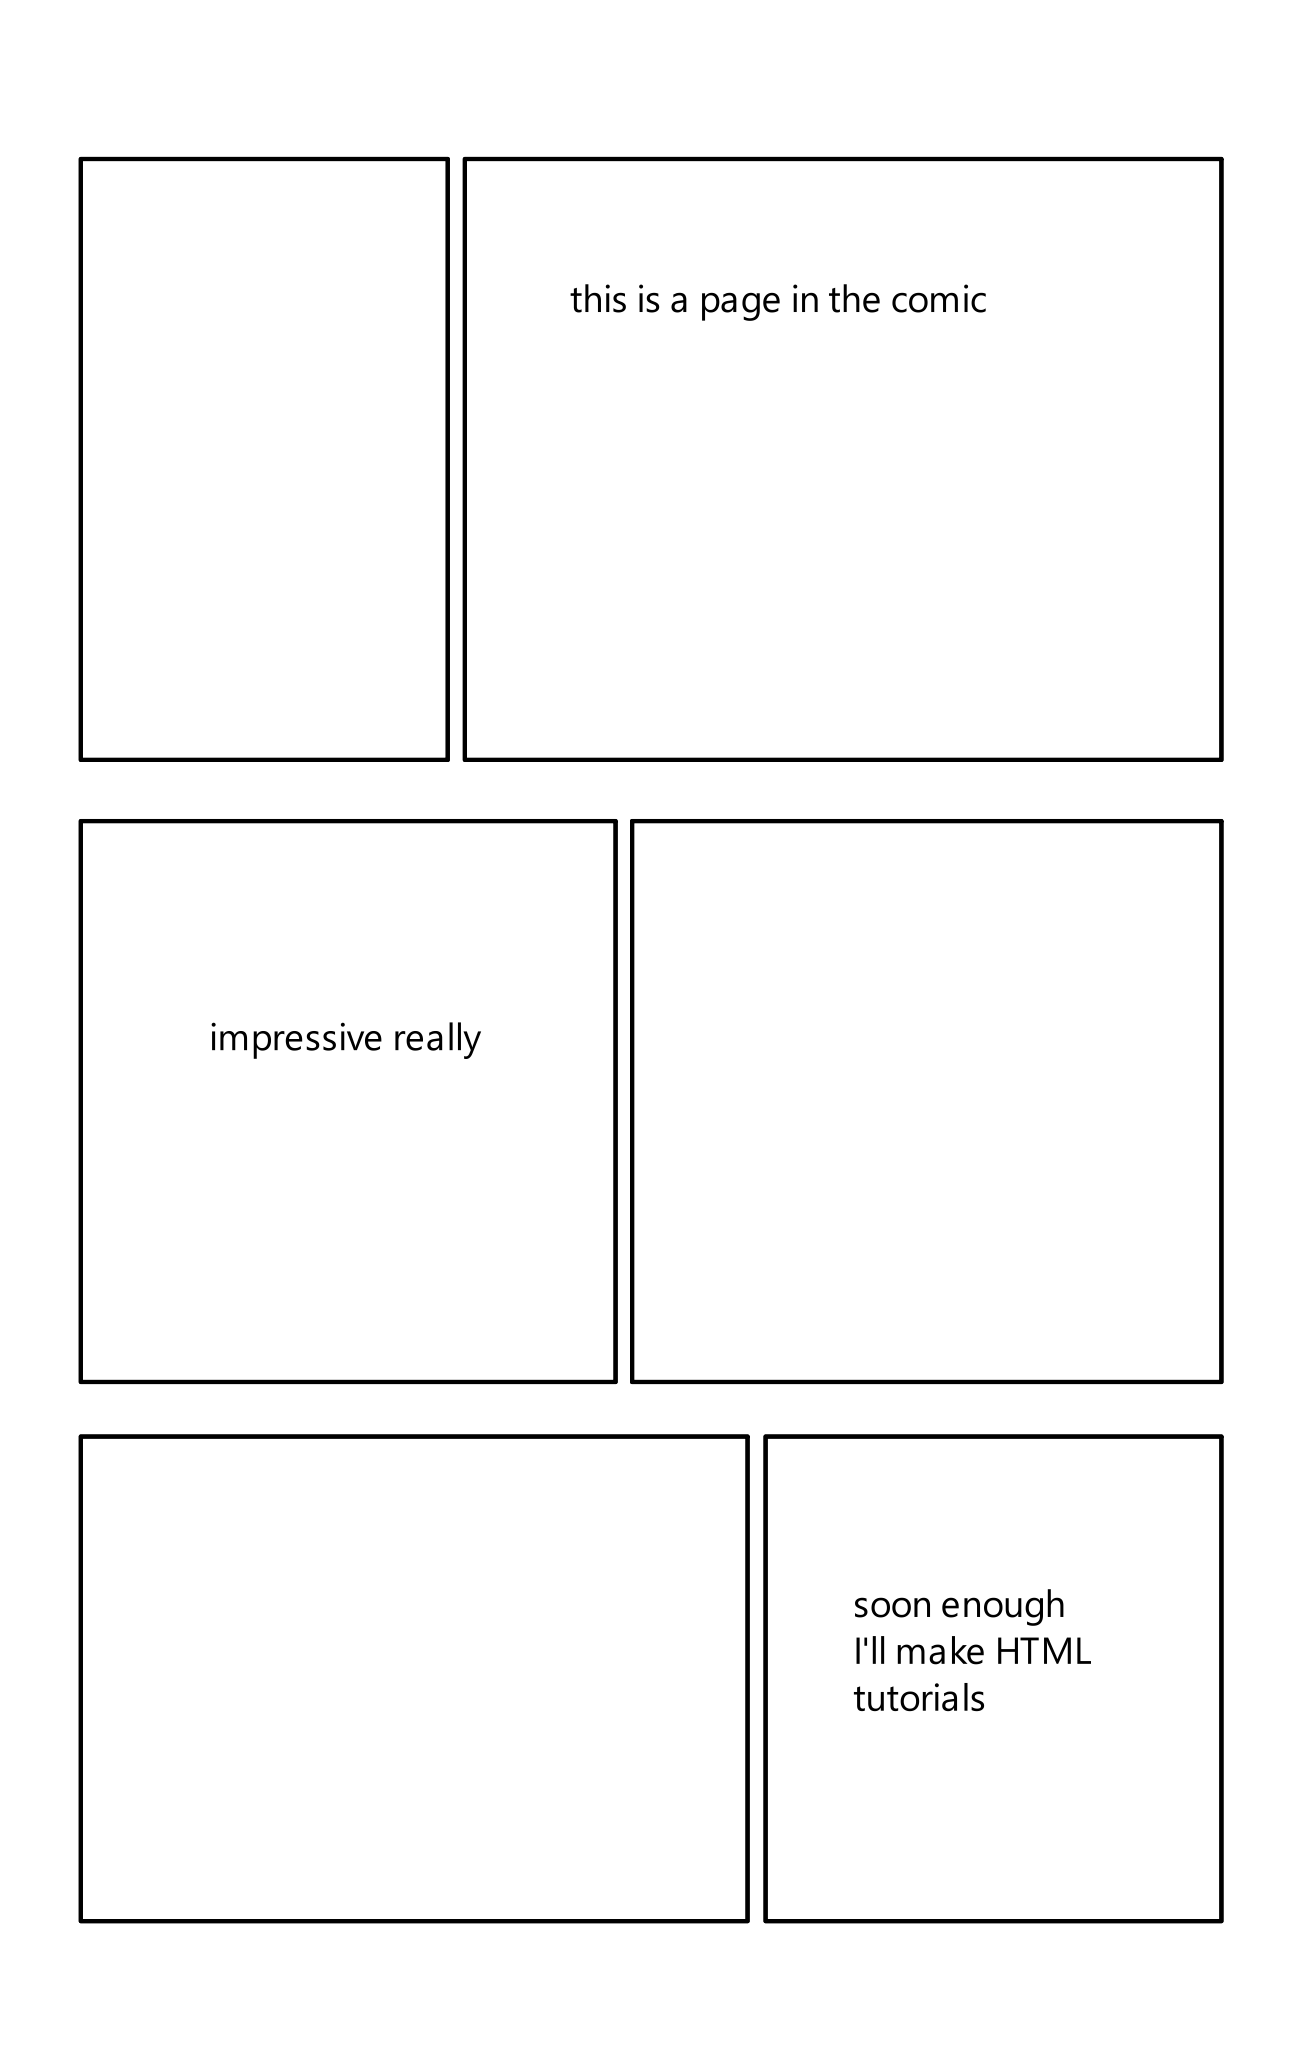 a comic page with six panels. all of them are white and three of them have text in black. the text reads: this is a page in the comic, impressive really, soon enough I'll make html tutorials